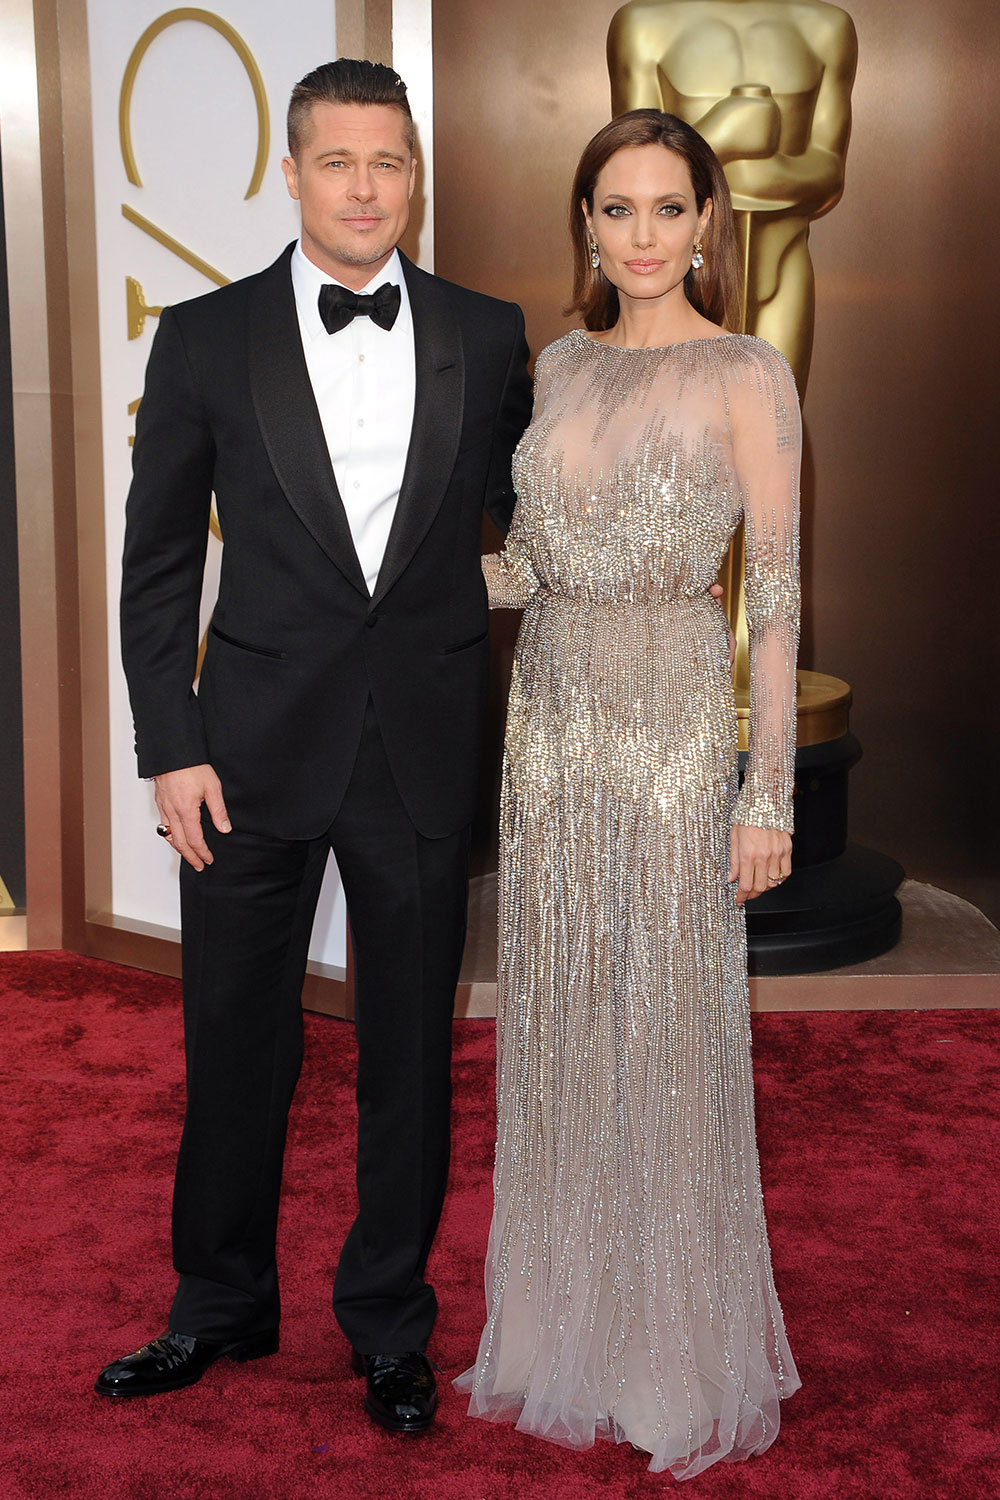 Brad Pitt and Angelina Jolie at the 86th Annual Academy Awards in 2014